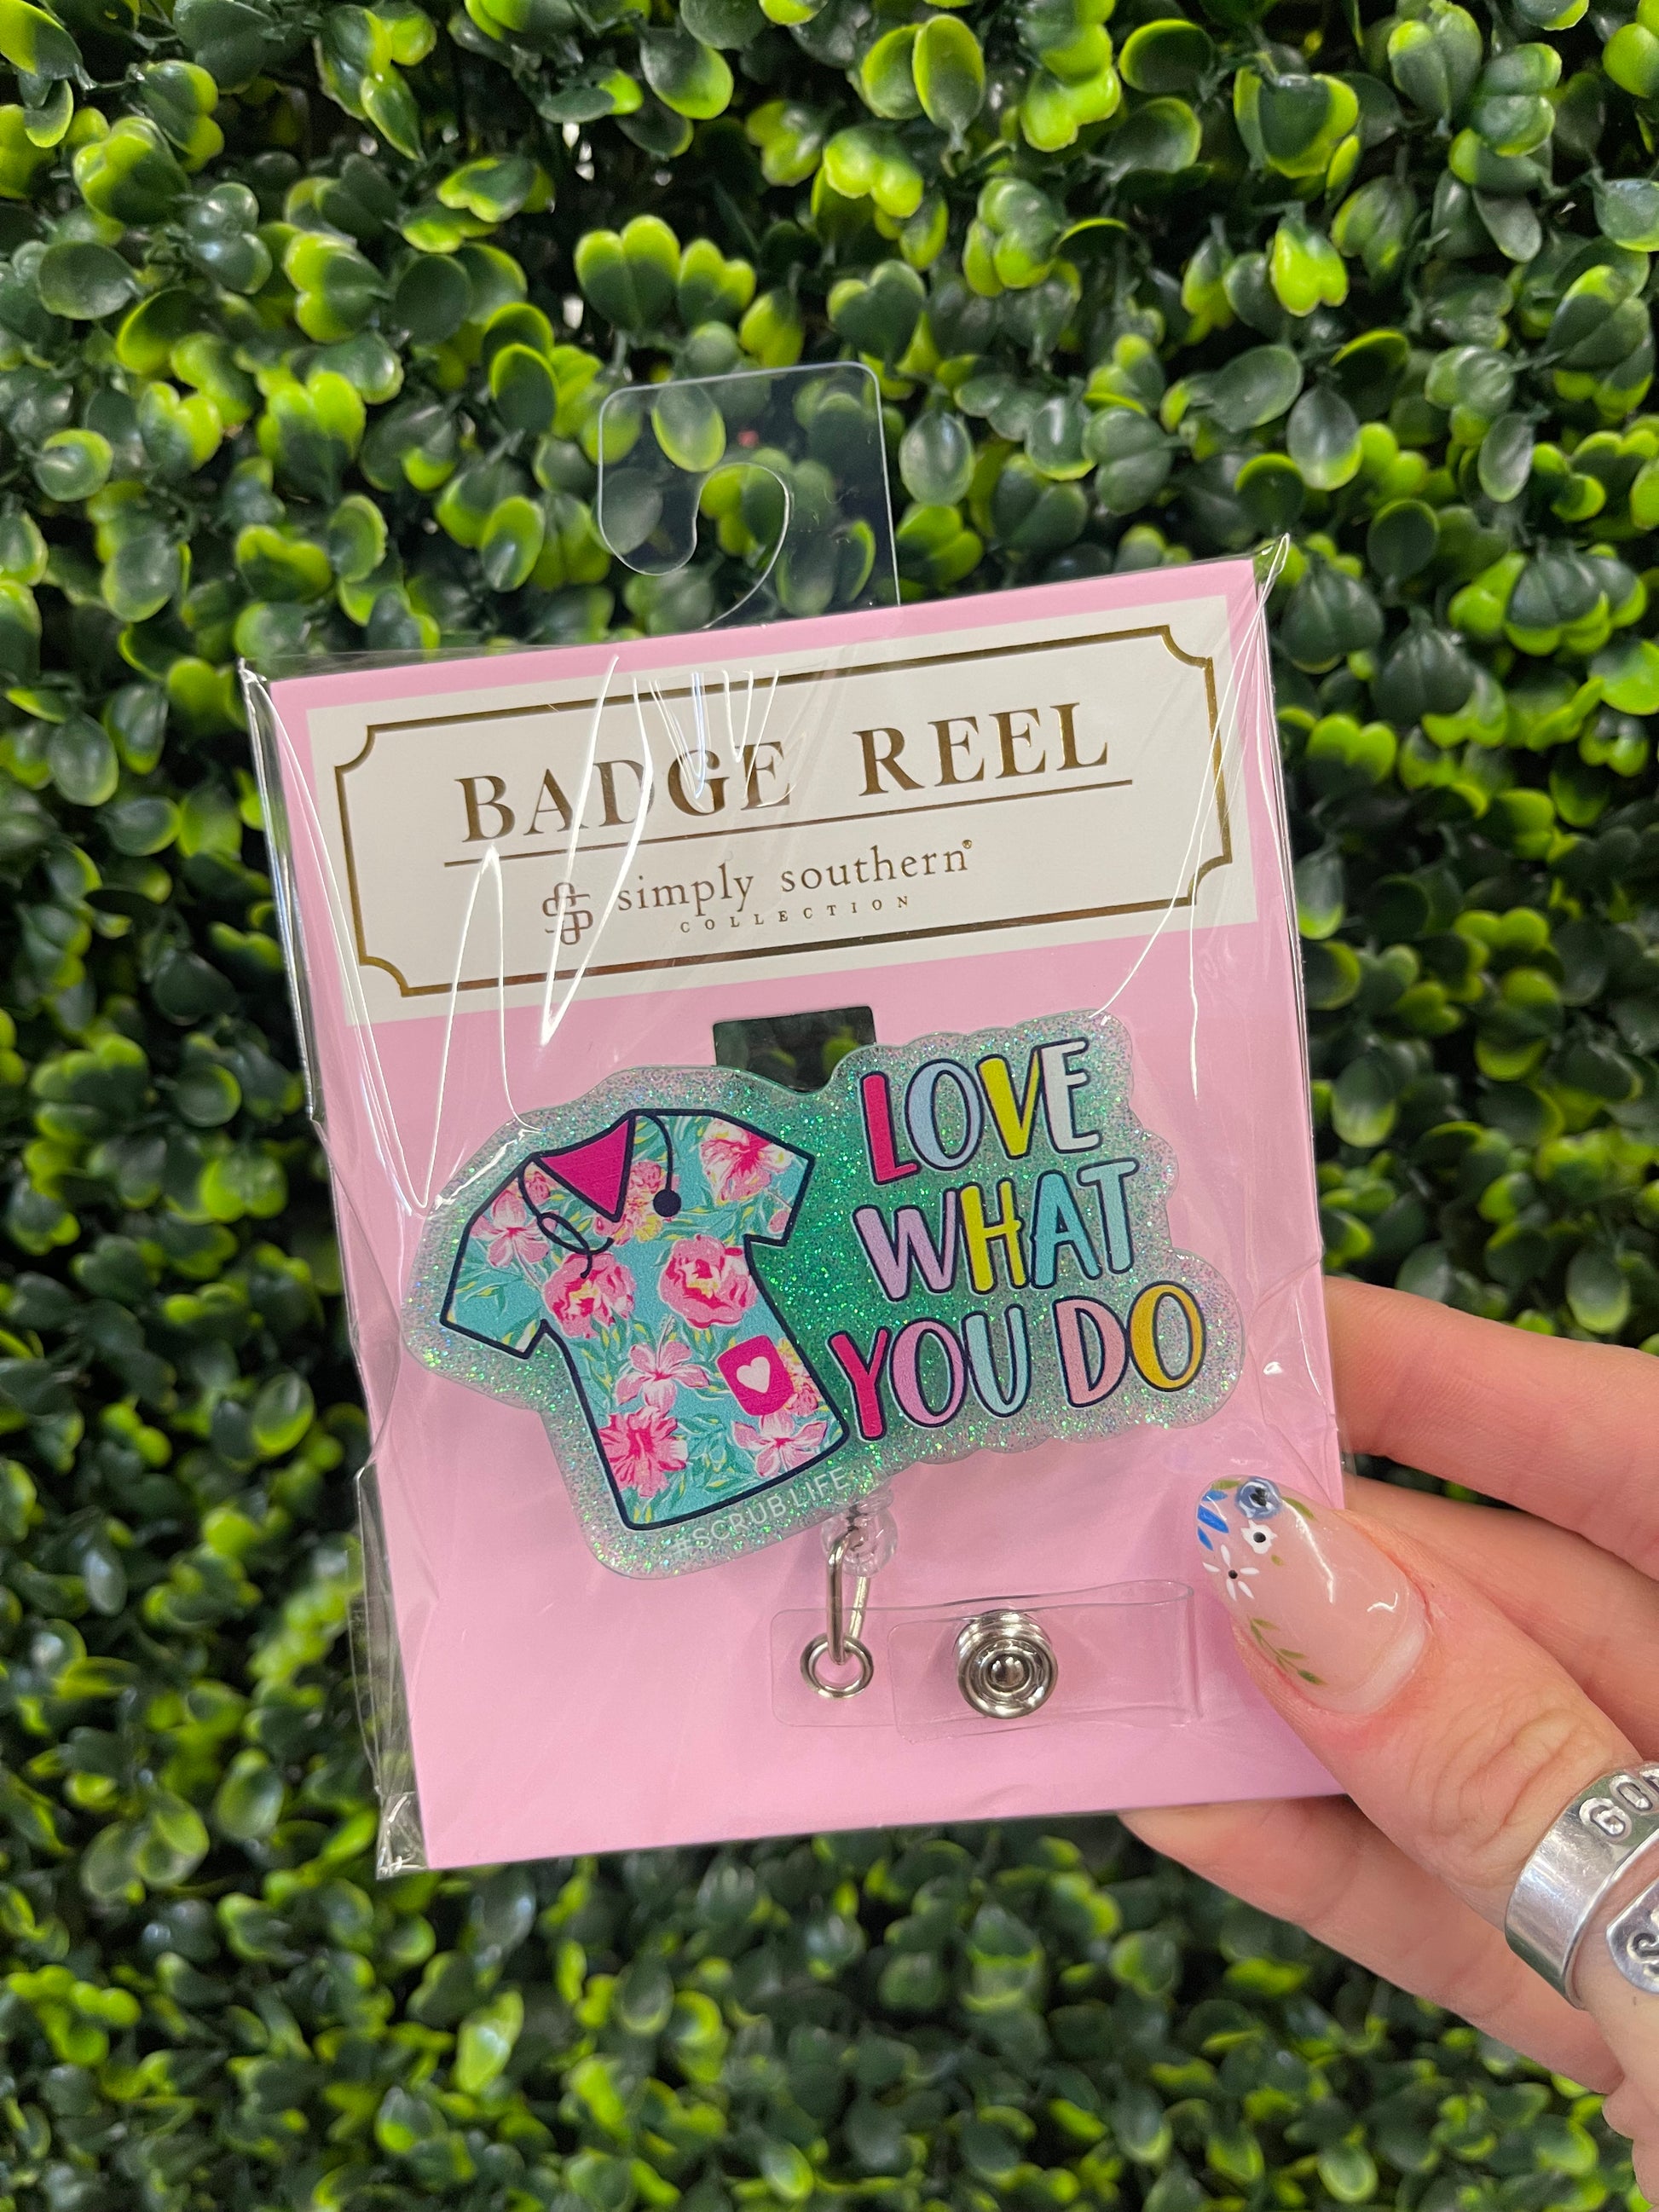 🌸Simply Southern badge reels are officially restocked!!🌸